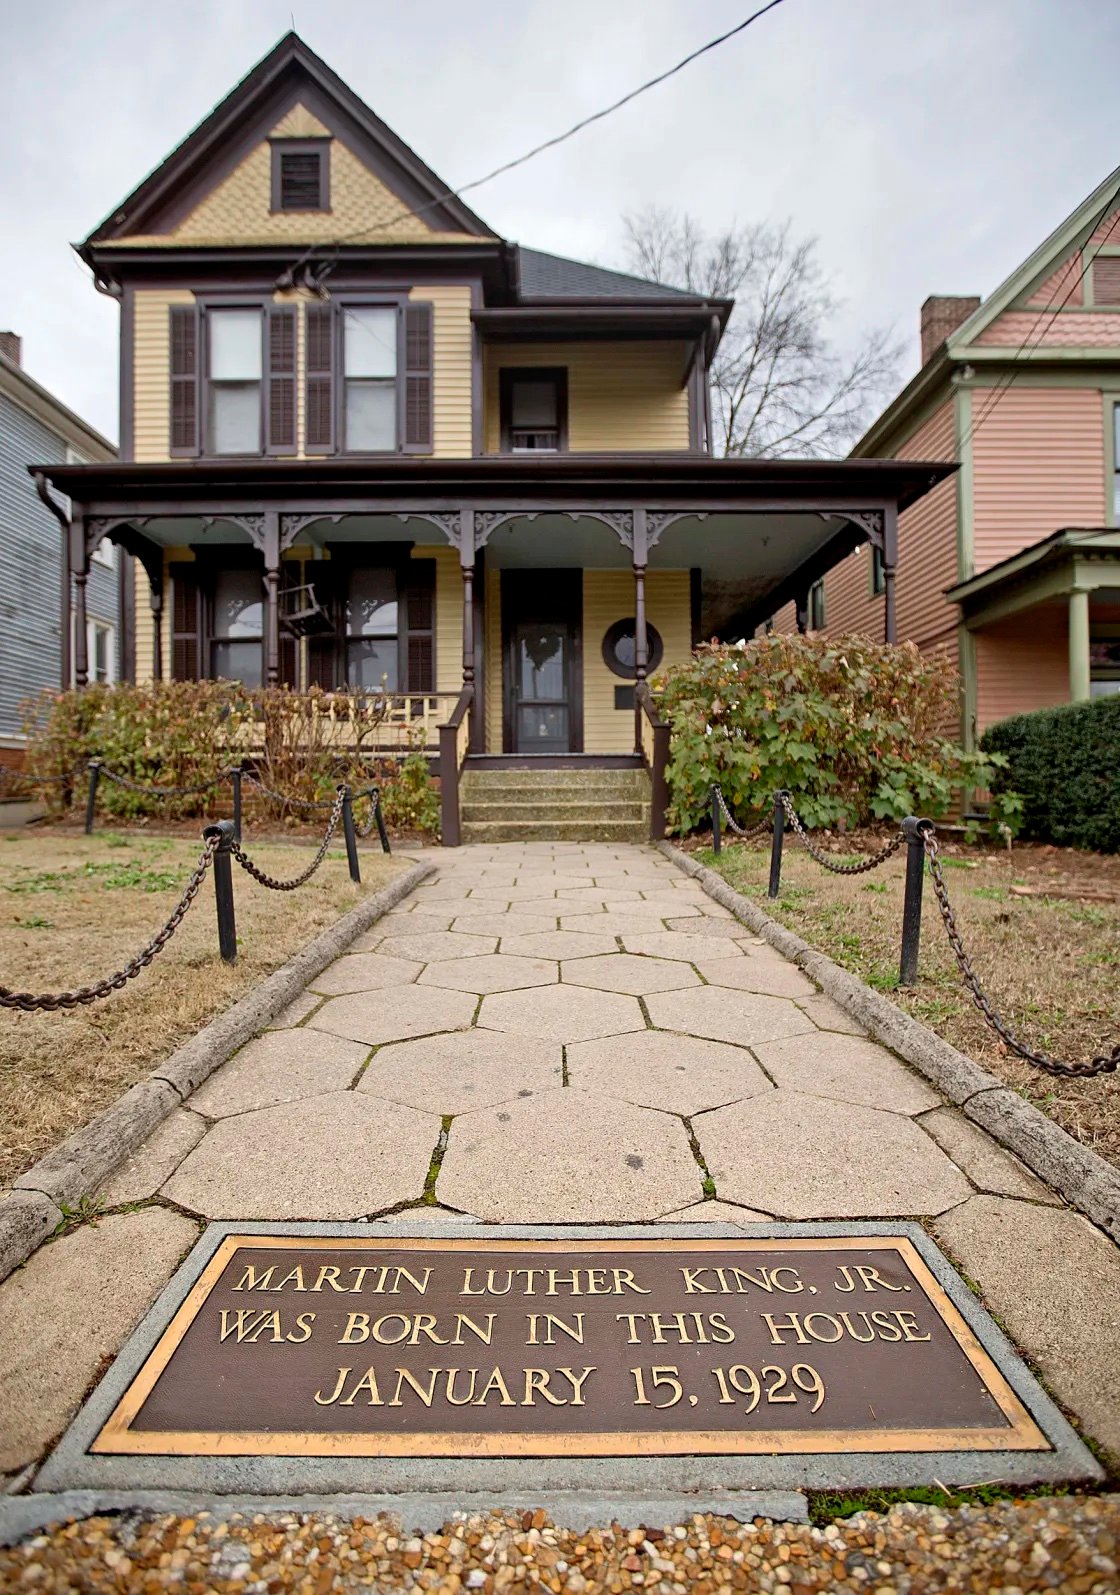 A photograph of the birth home of Martin Luther King Jr., with a memorial plaque embedded in the walkway